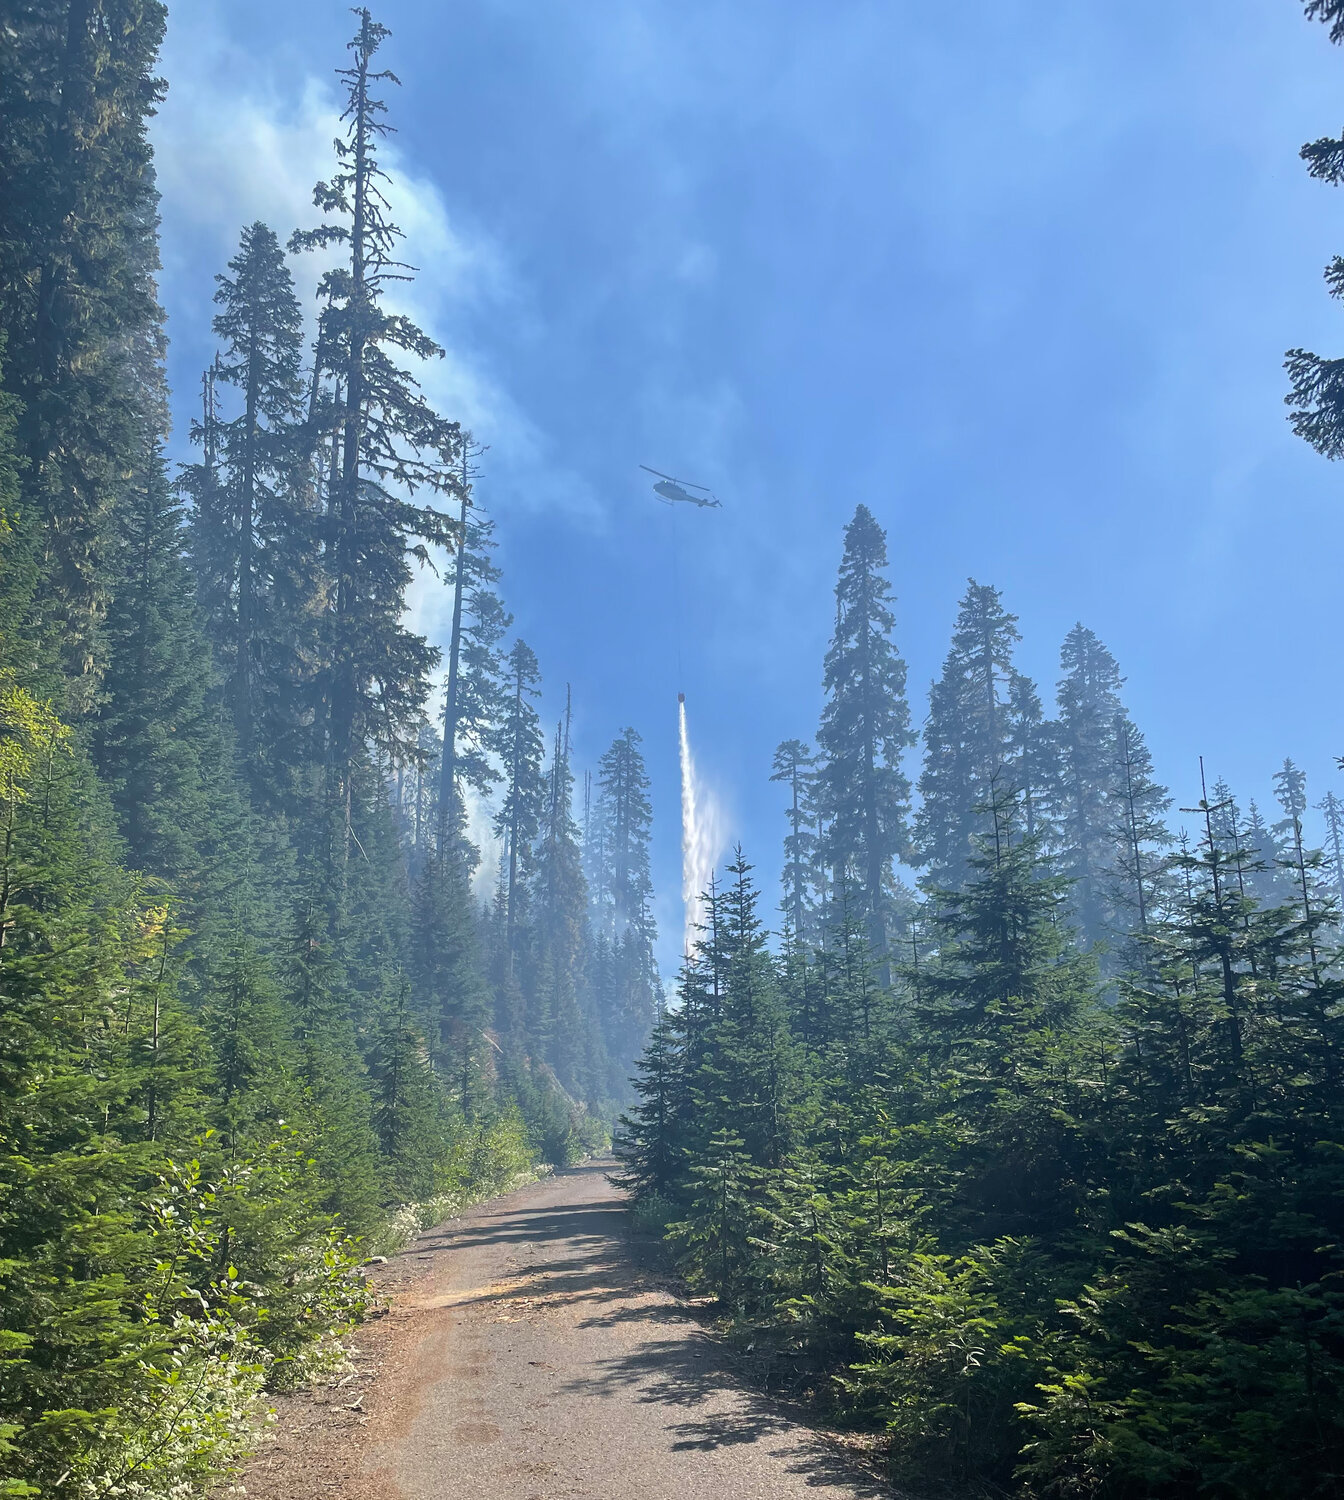 Amid smoke, a helicopter drops buckets of water over the second Spencer Quartz Fire in the Gifford Pinchot National Forest, the largest of the Cowlitz Complex Fires, which were set by a lightning storm on Aug. 25.